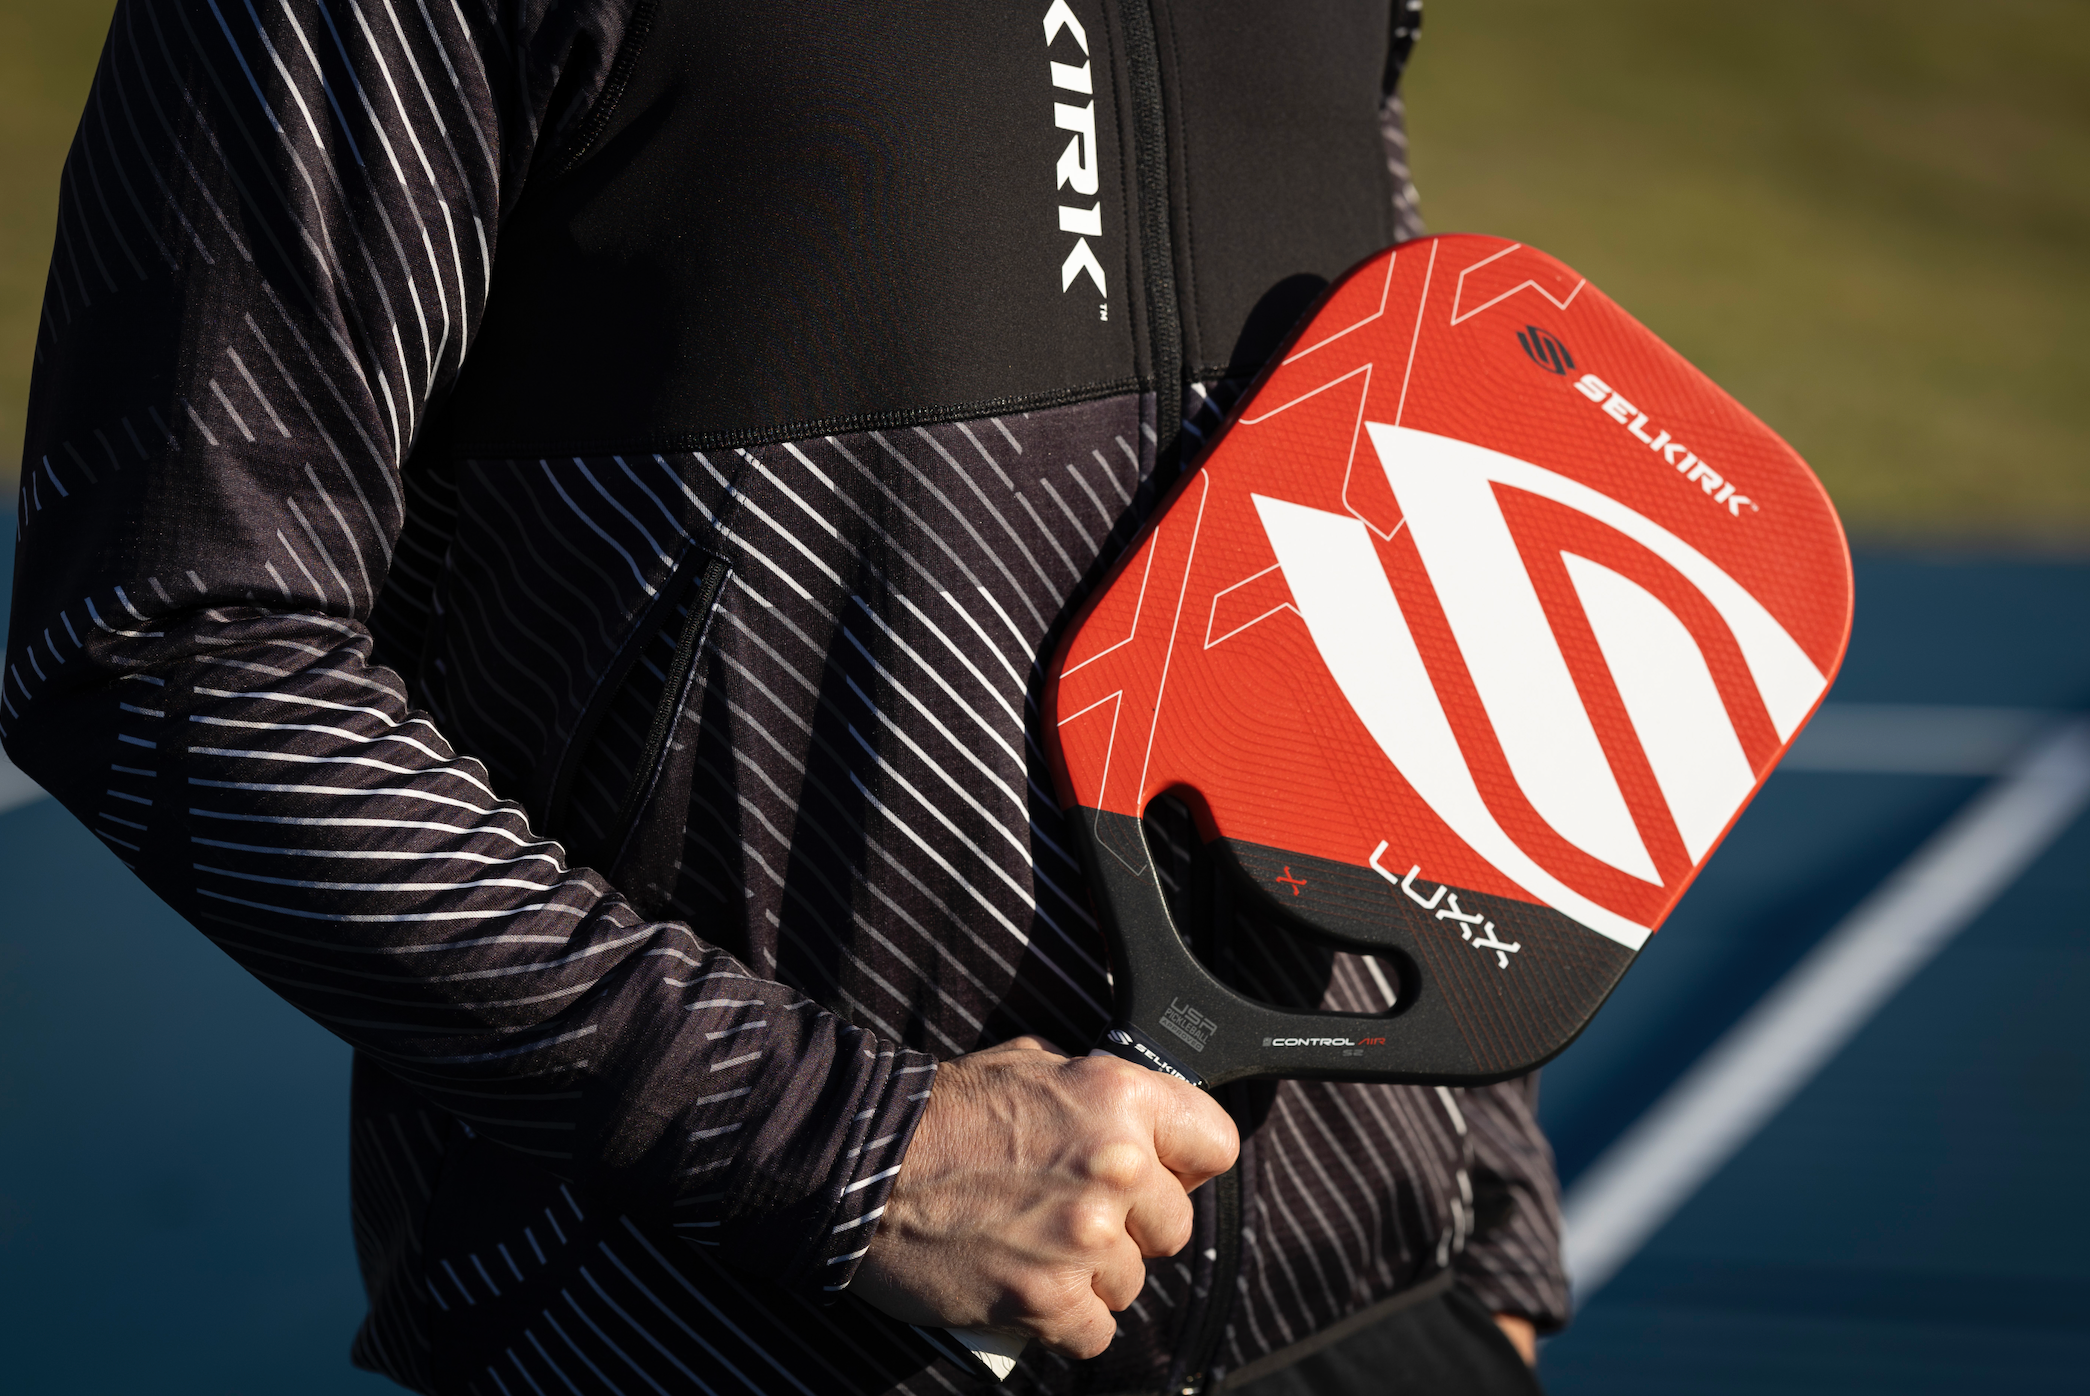 What is the sweet spot on a pickleball paddle?